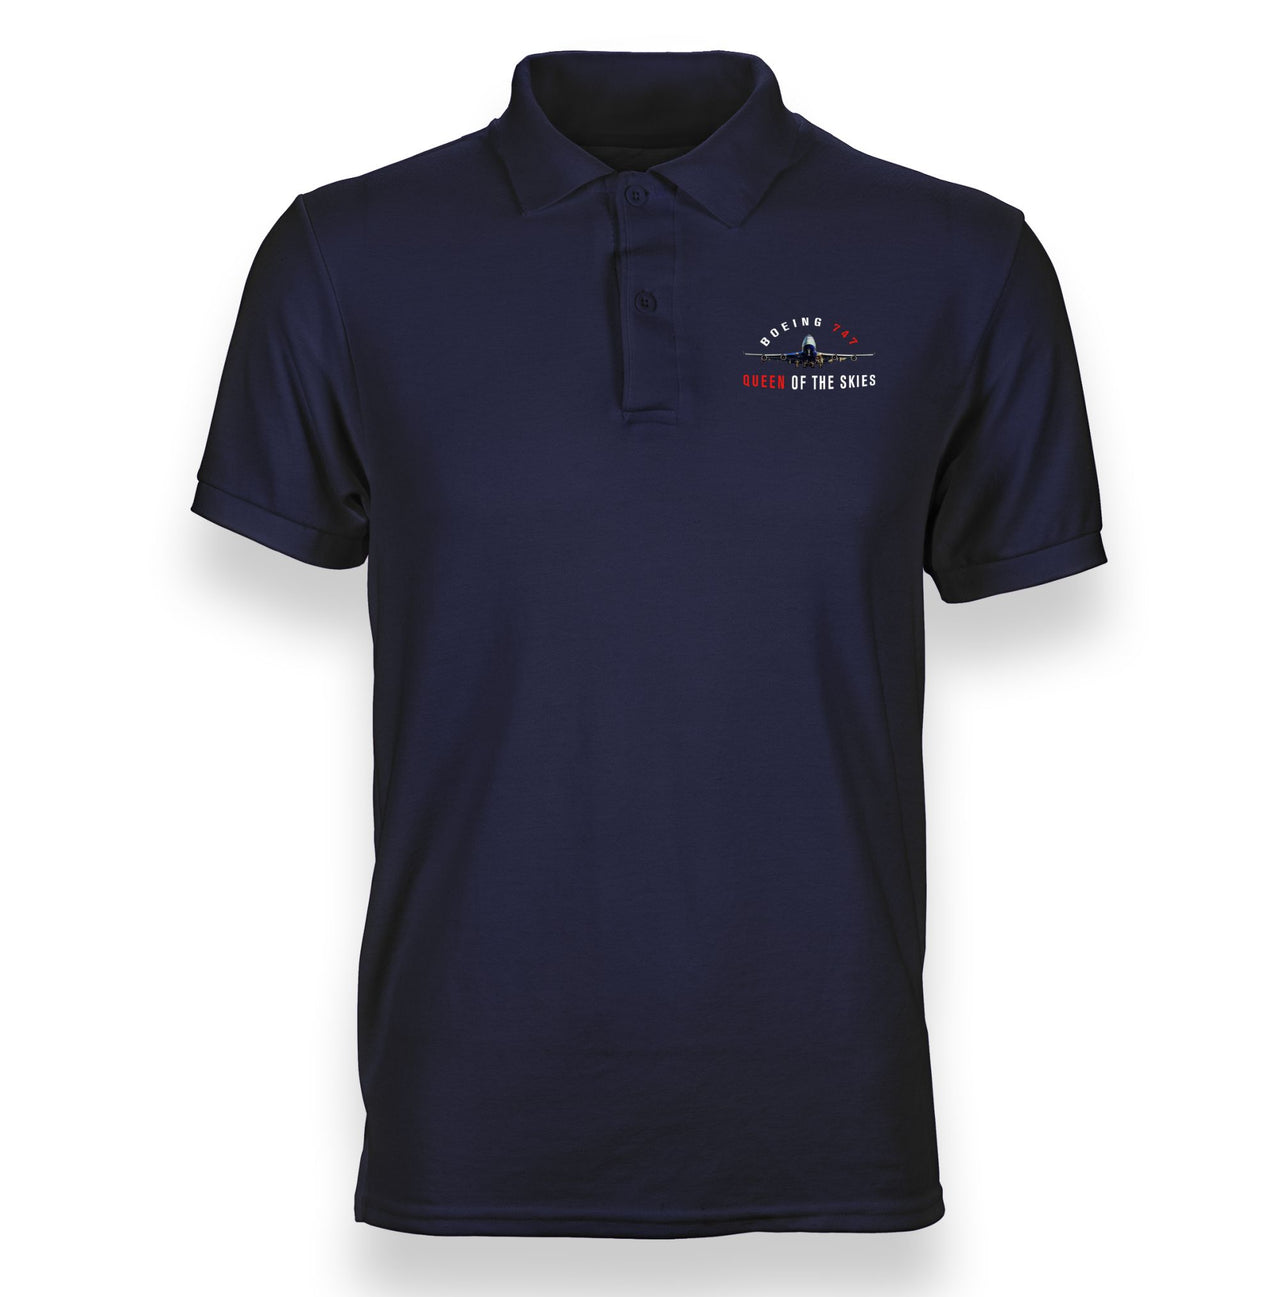 Boeing 747 Queen of the Skies Designed "WOMEN" Polo T-Shirts